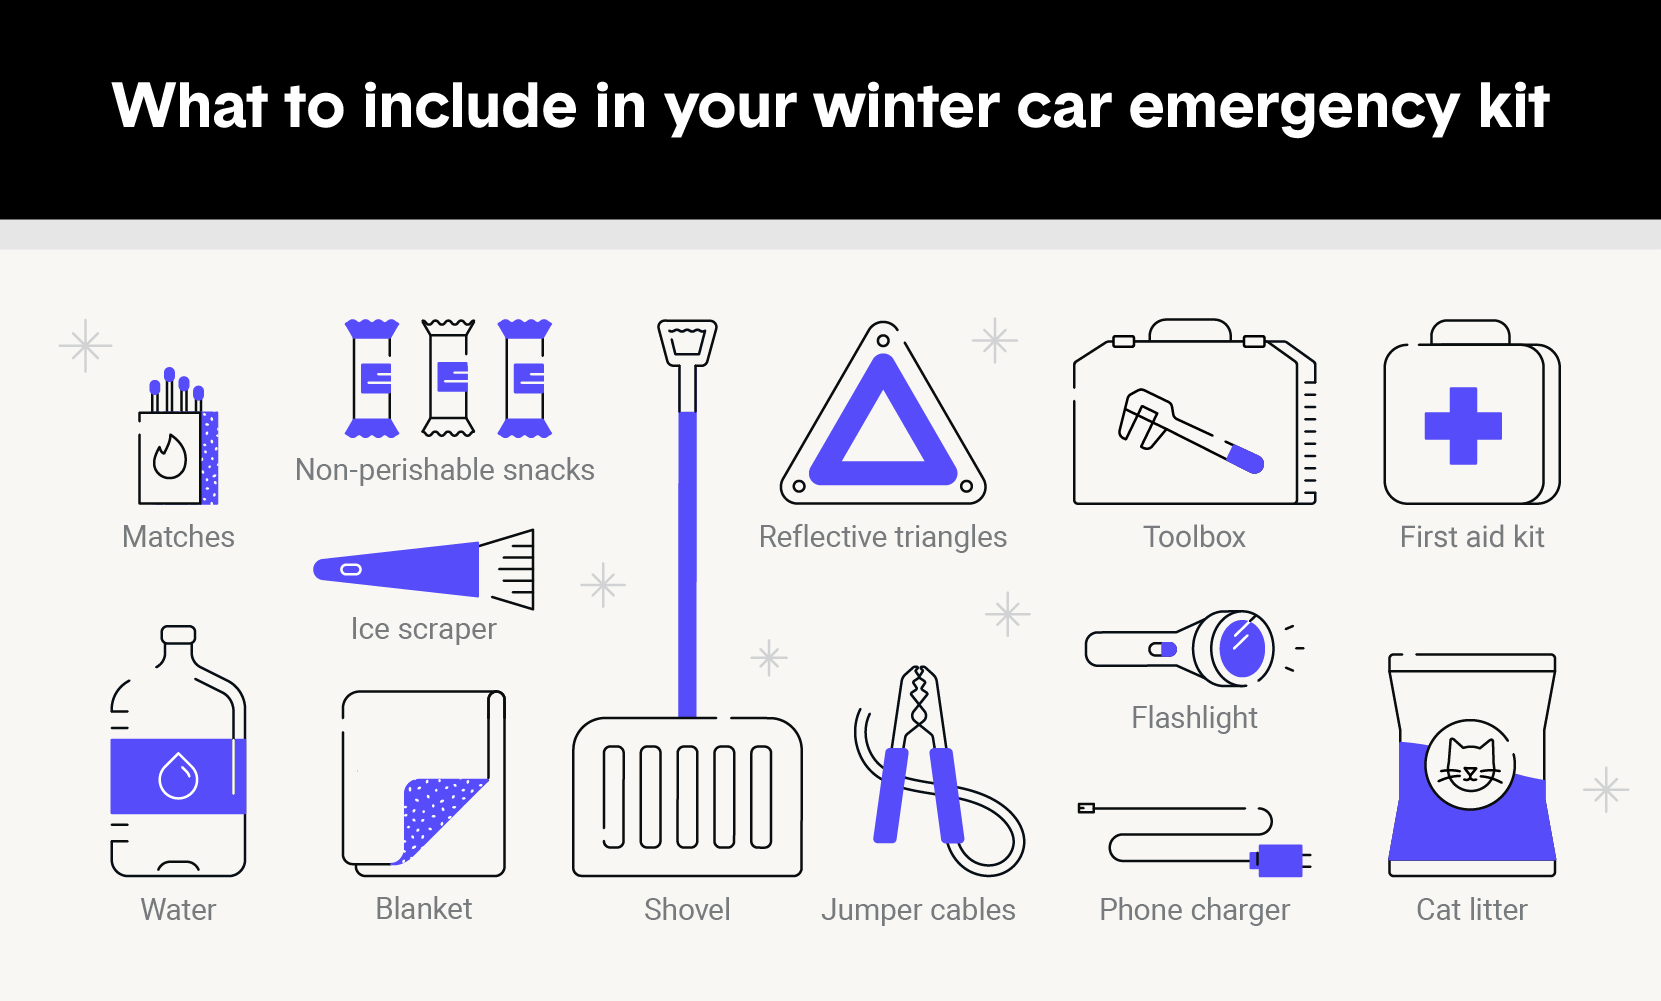 List of emergency supplies for winter driving include food water shovel flashlight